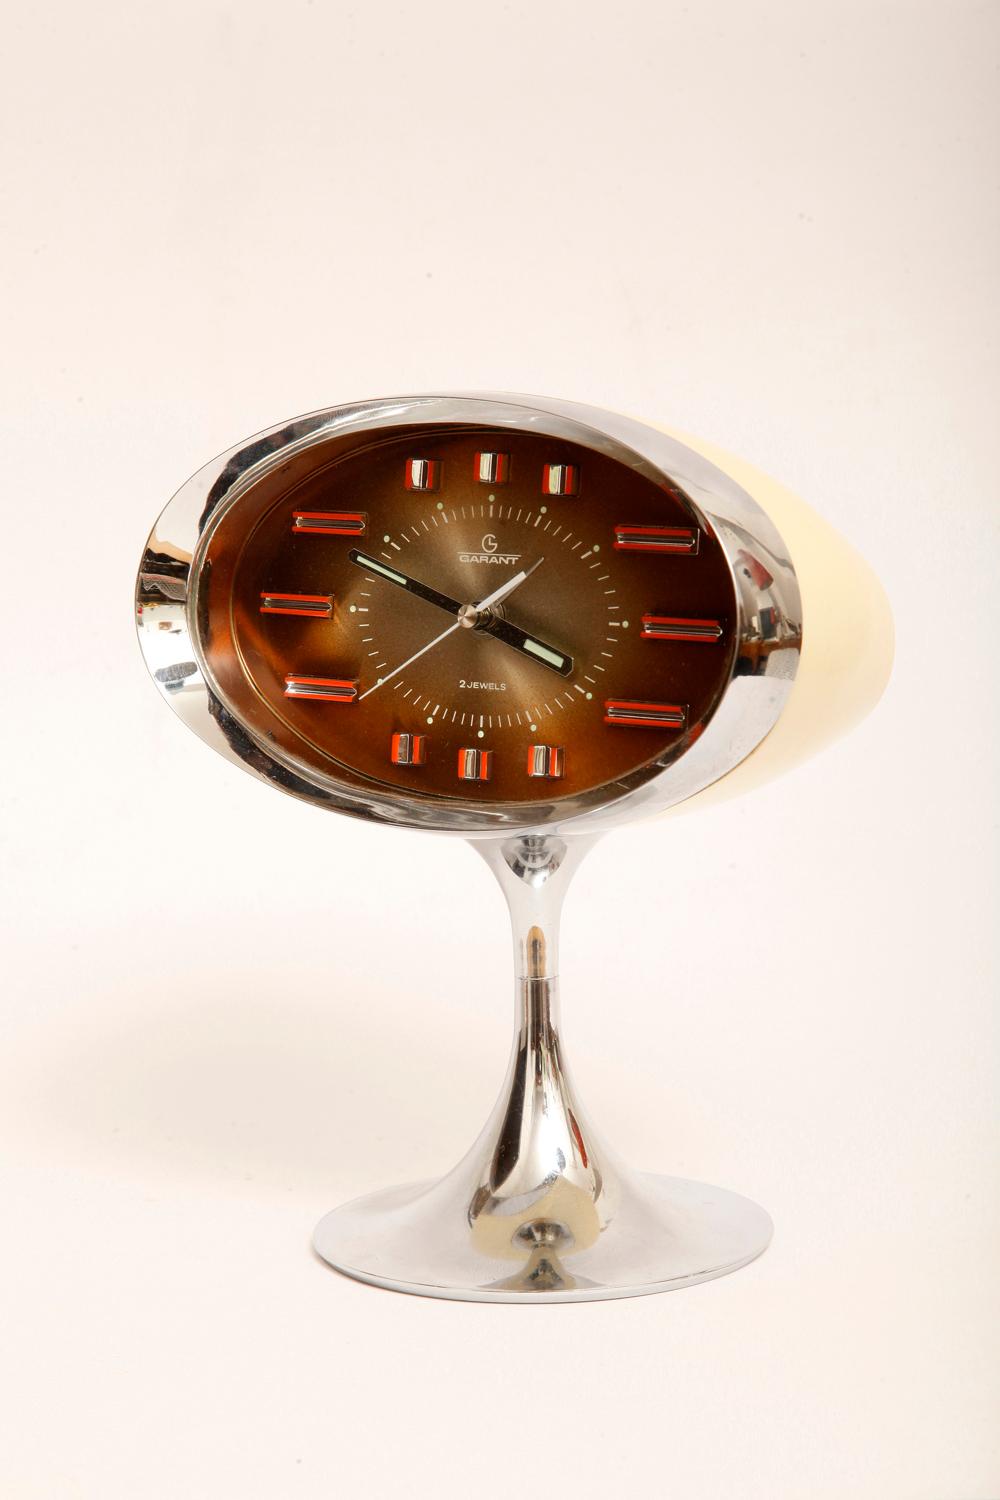 Japanese Space Age Alarm Clock Garant, Plastic and Chromed, 1970s For Sale 12